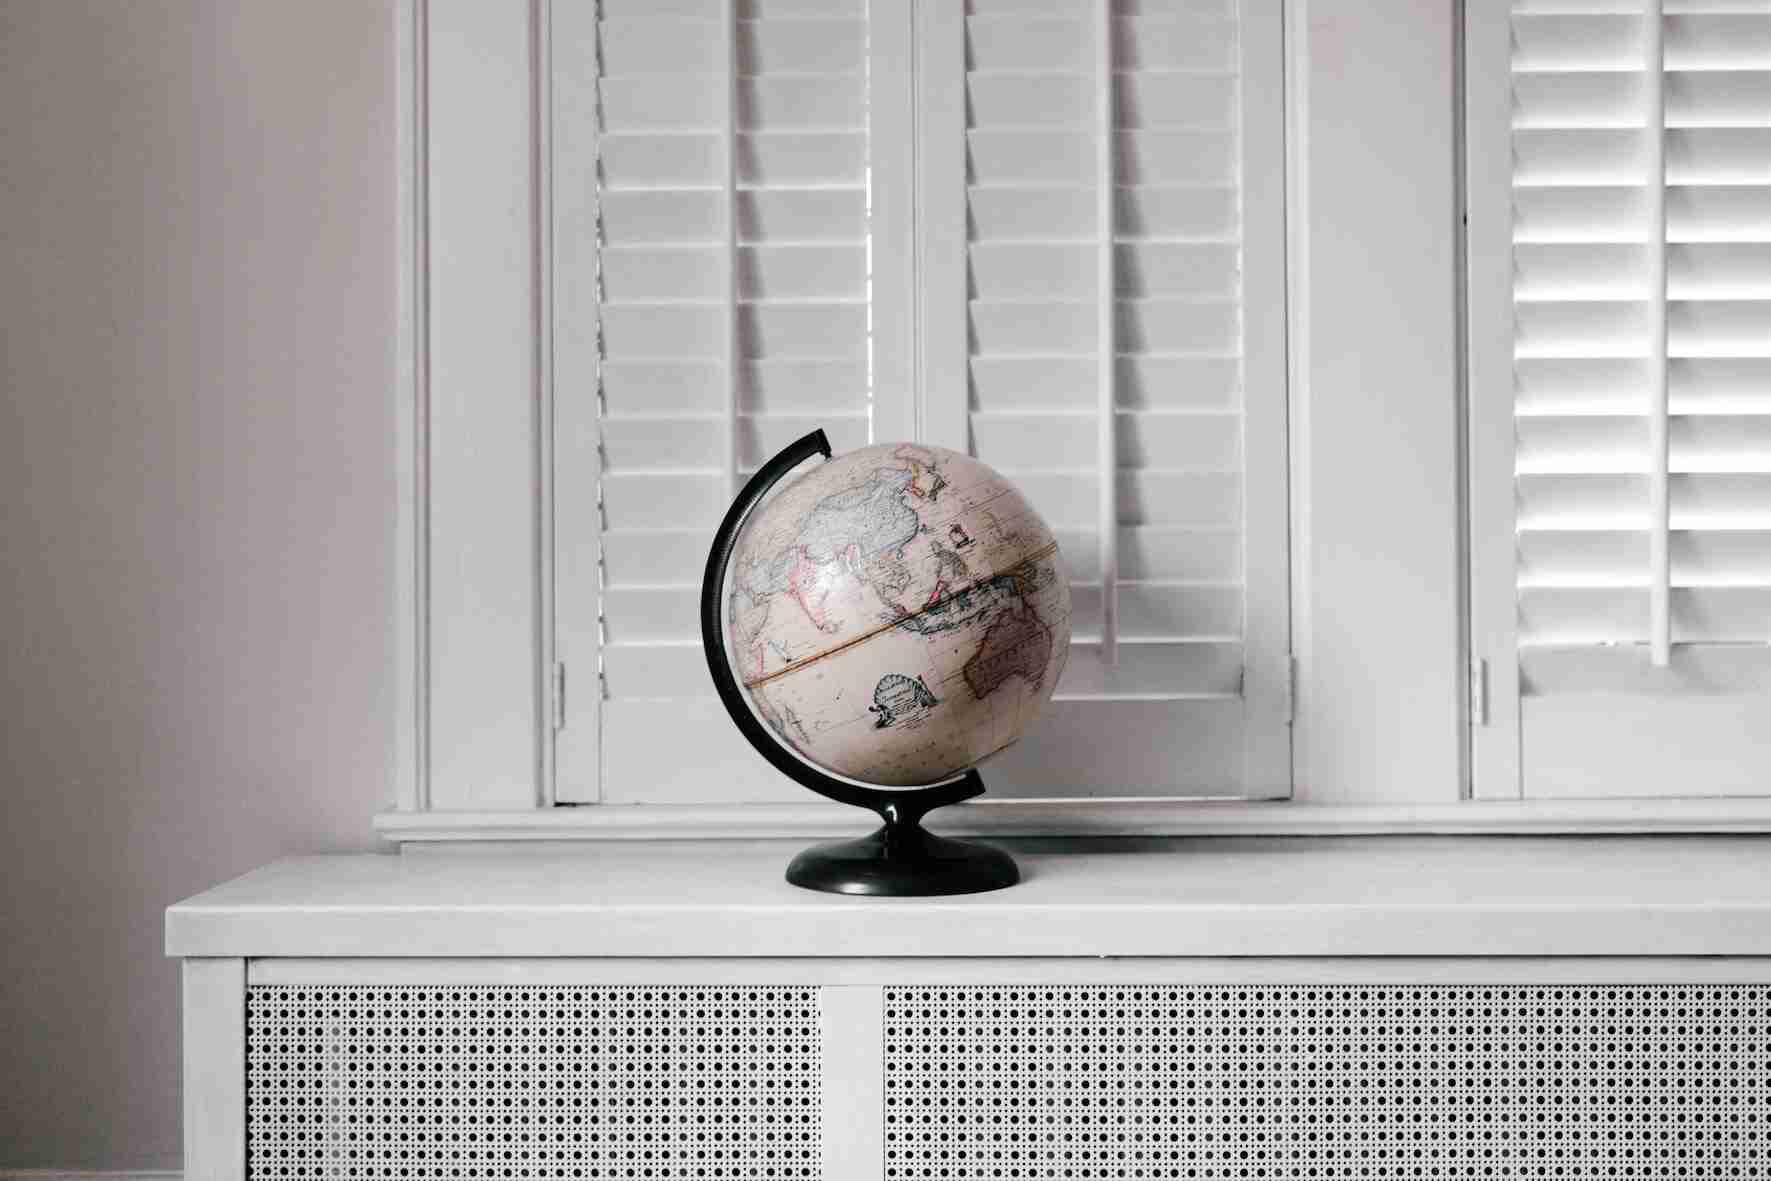 A black and white globe sits in front of window shutters